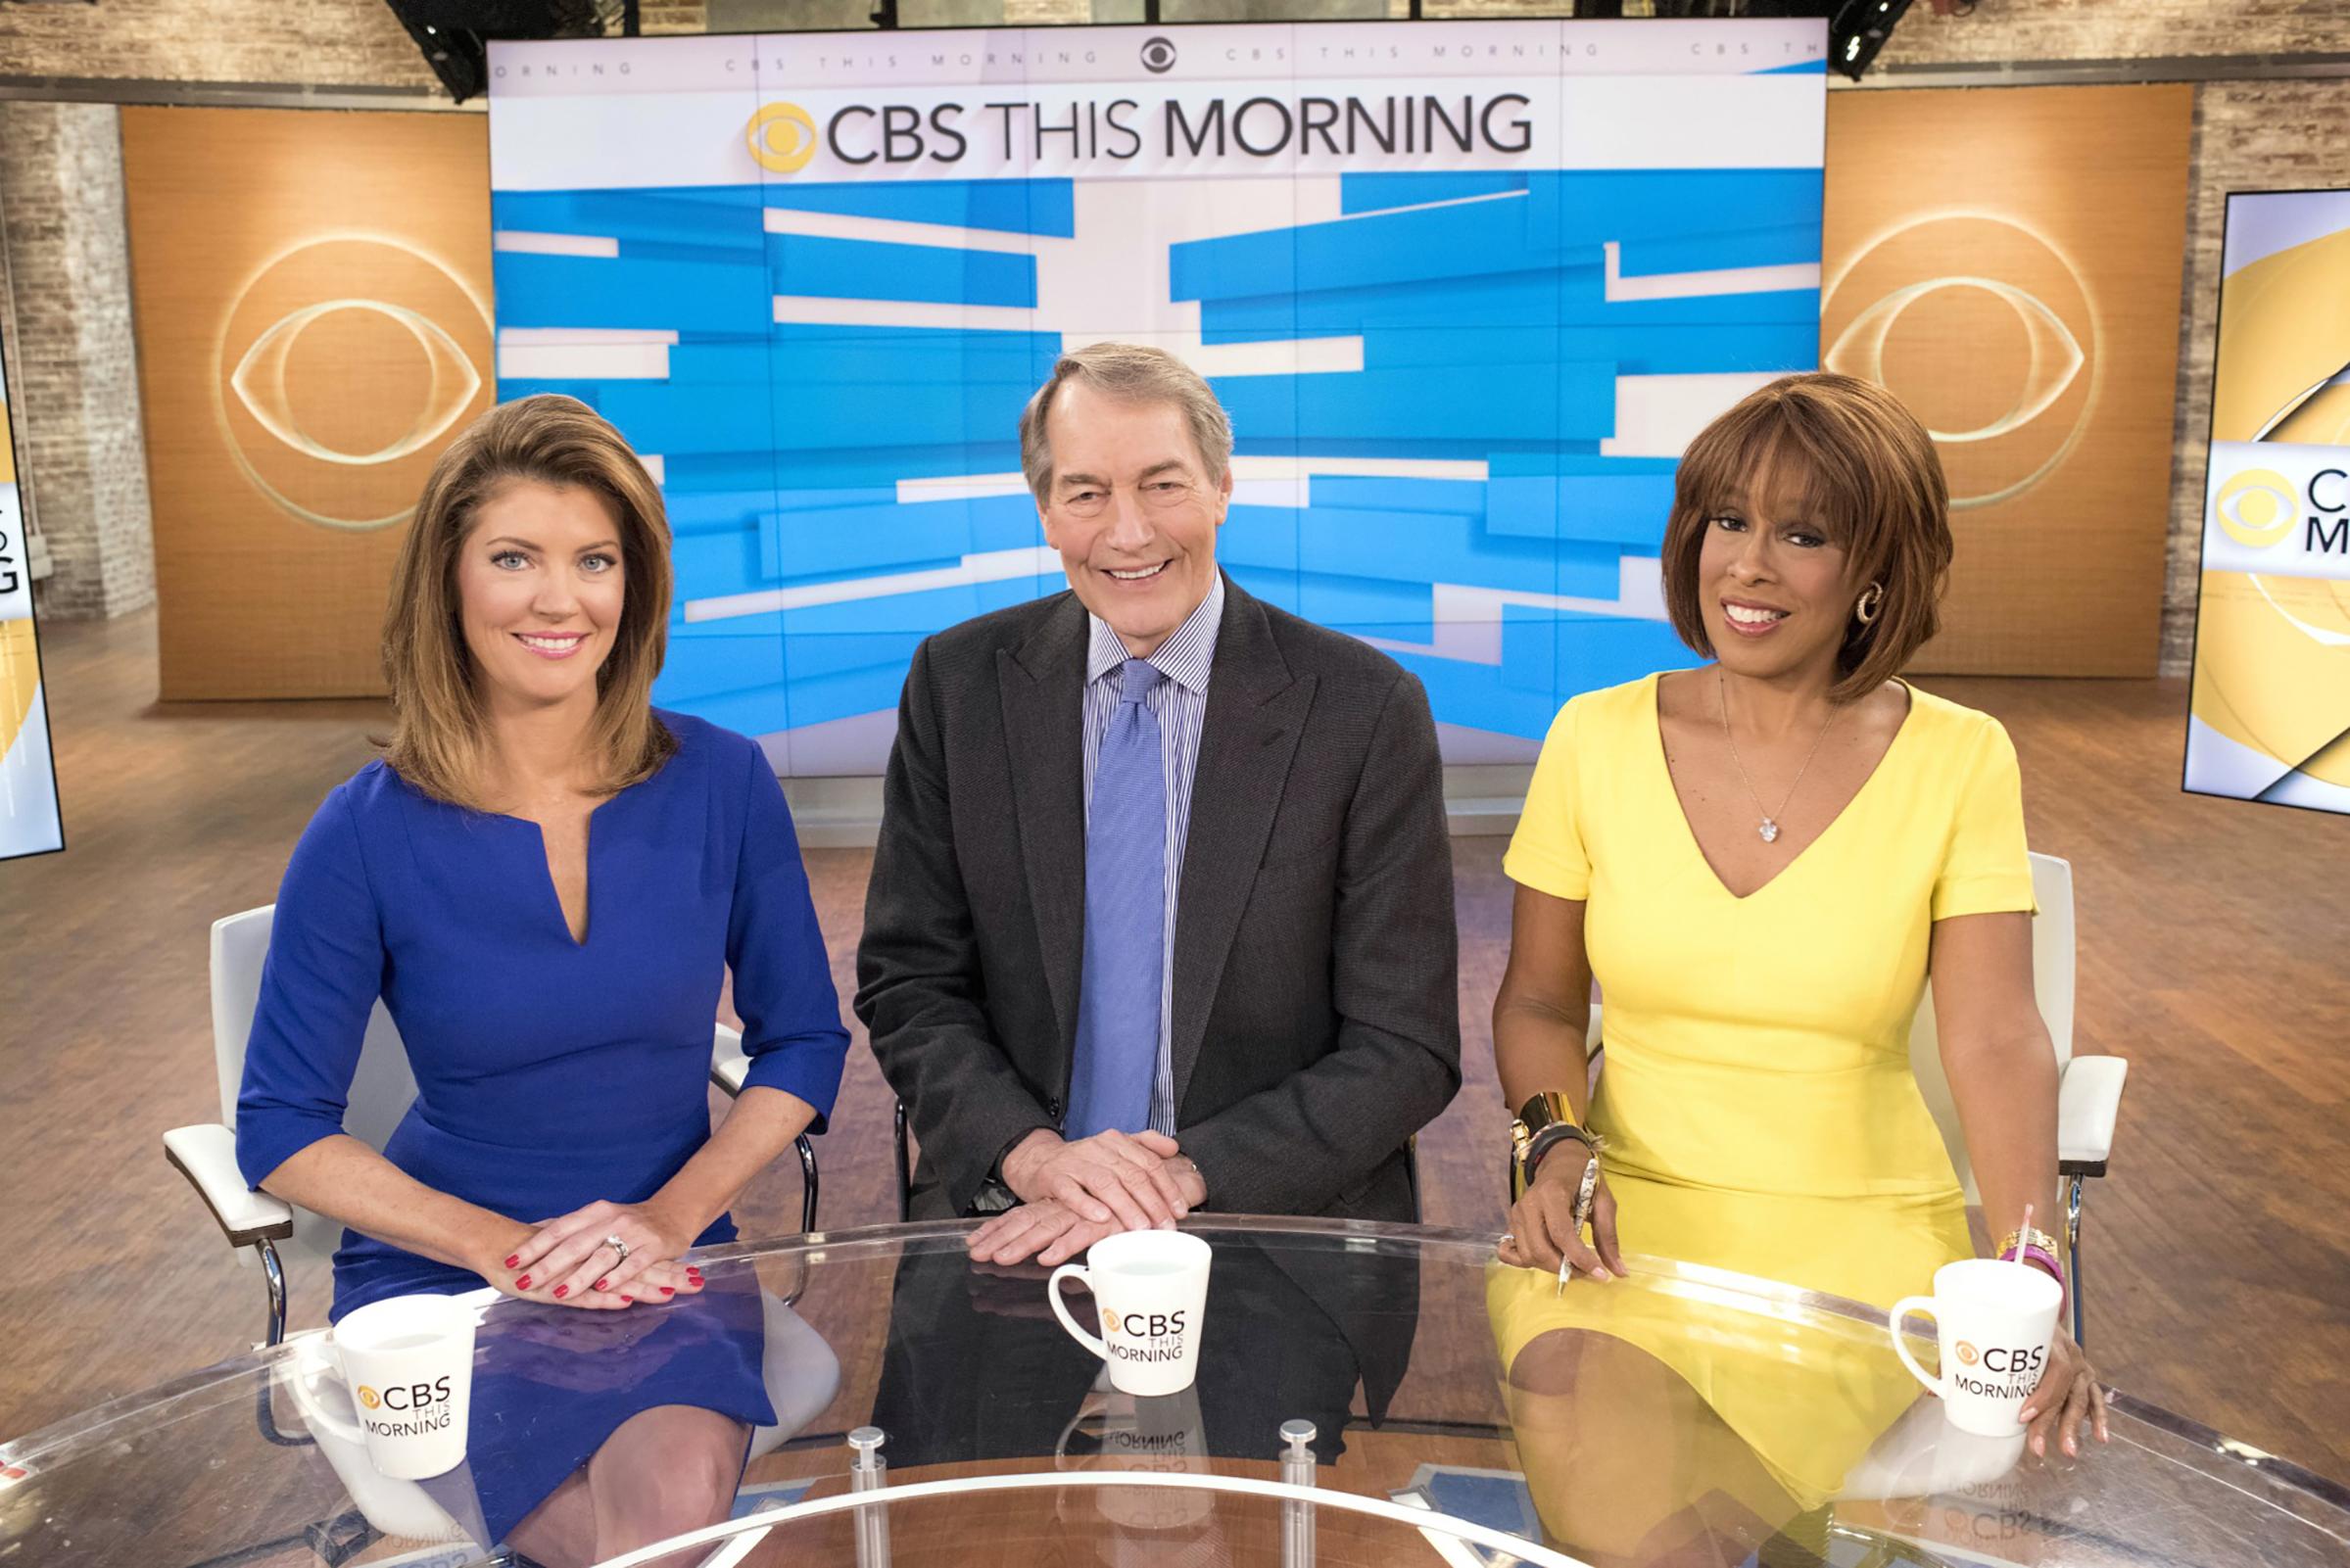 King with morning co-hosts Norah O’Donnell and Charlie Rose at CBS in 2016